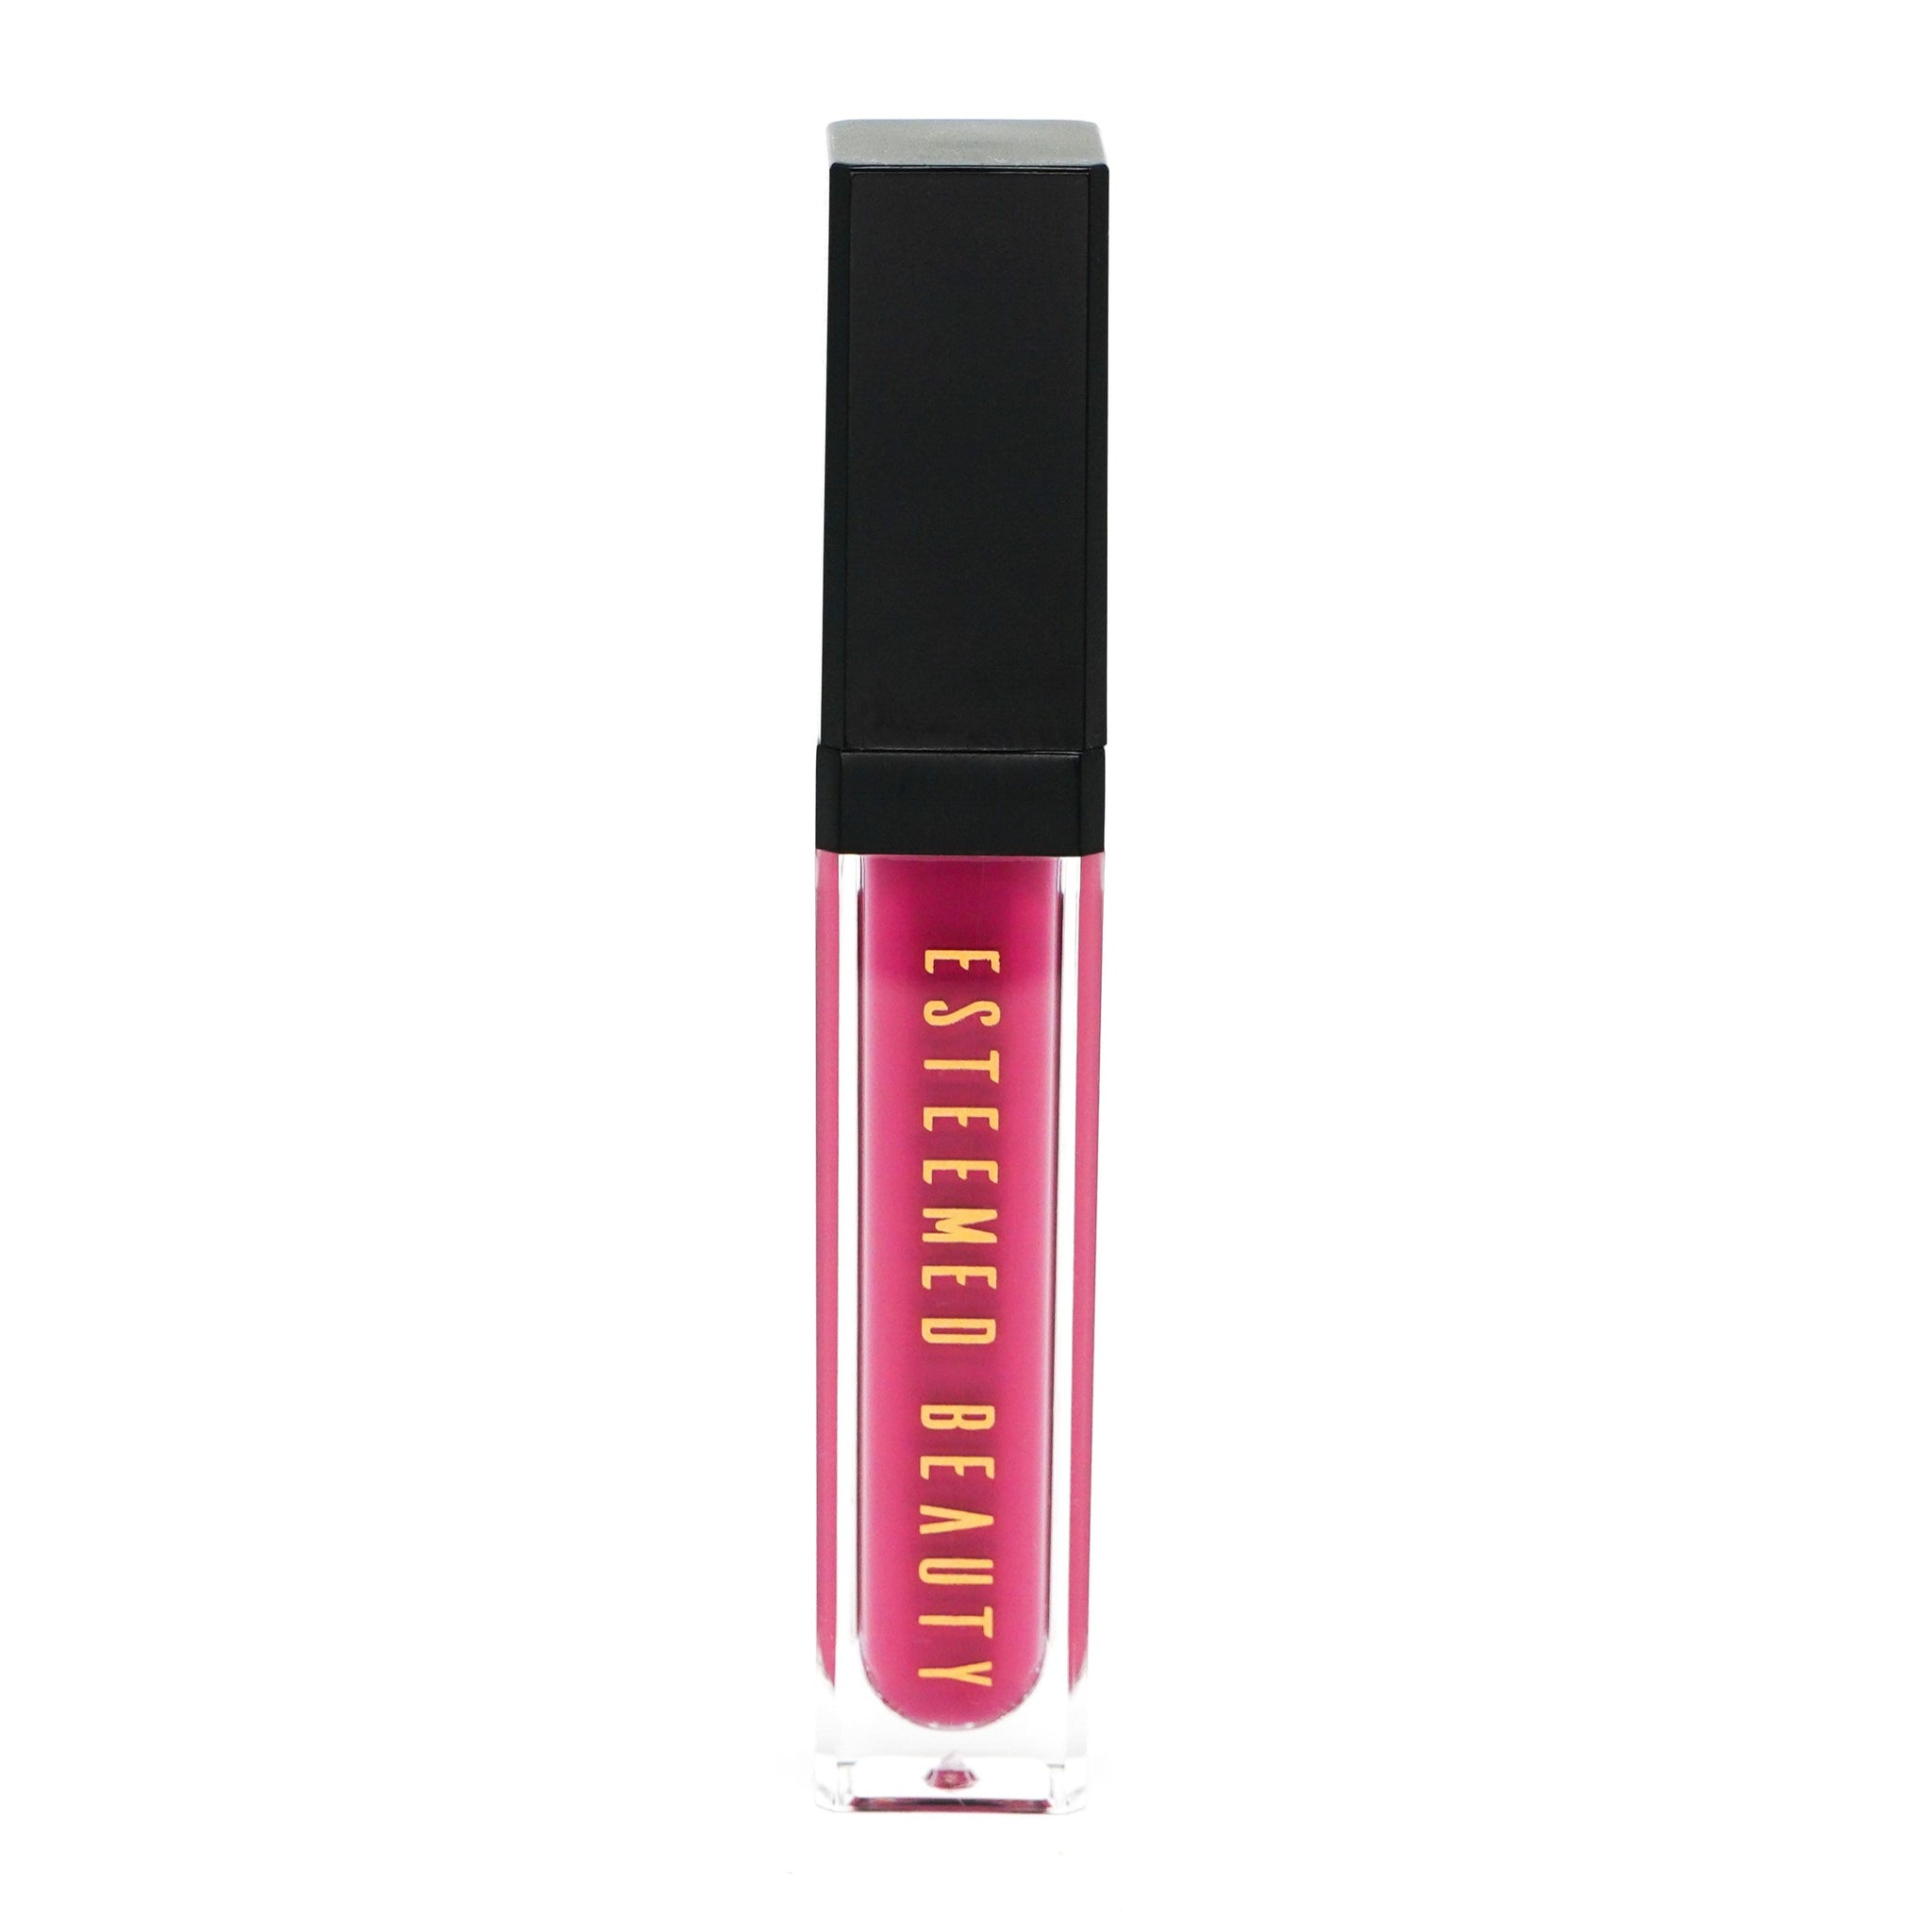 Feisty Long Lasting Liquid Lipstick-Matte with Light and mirror